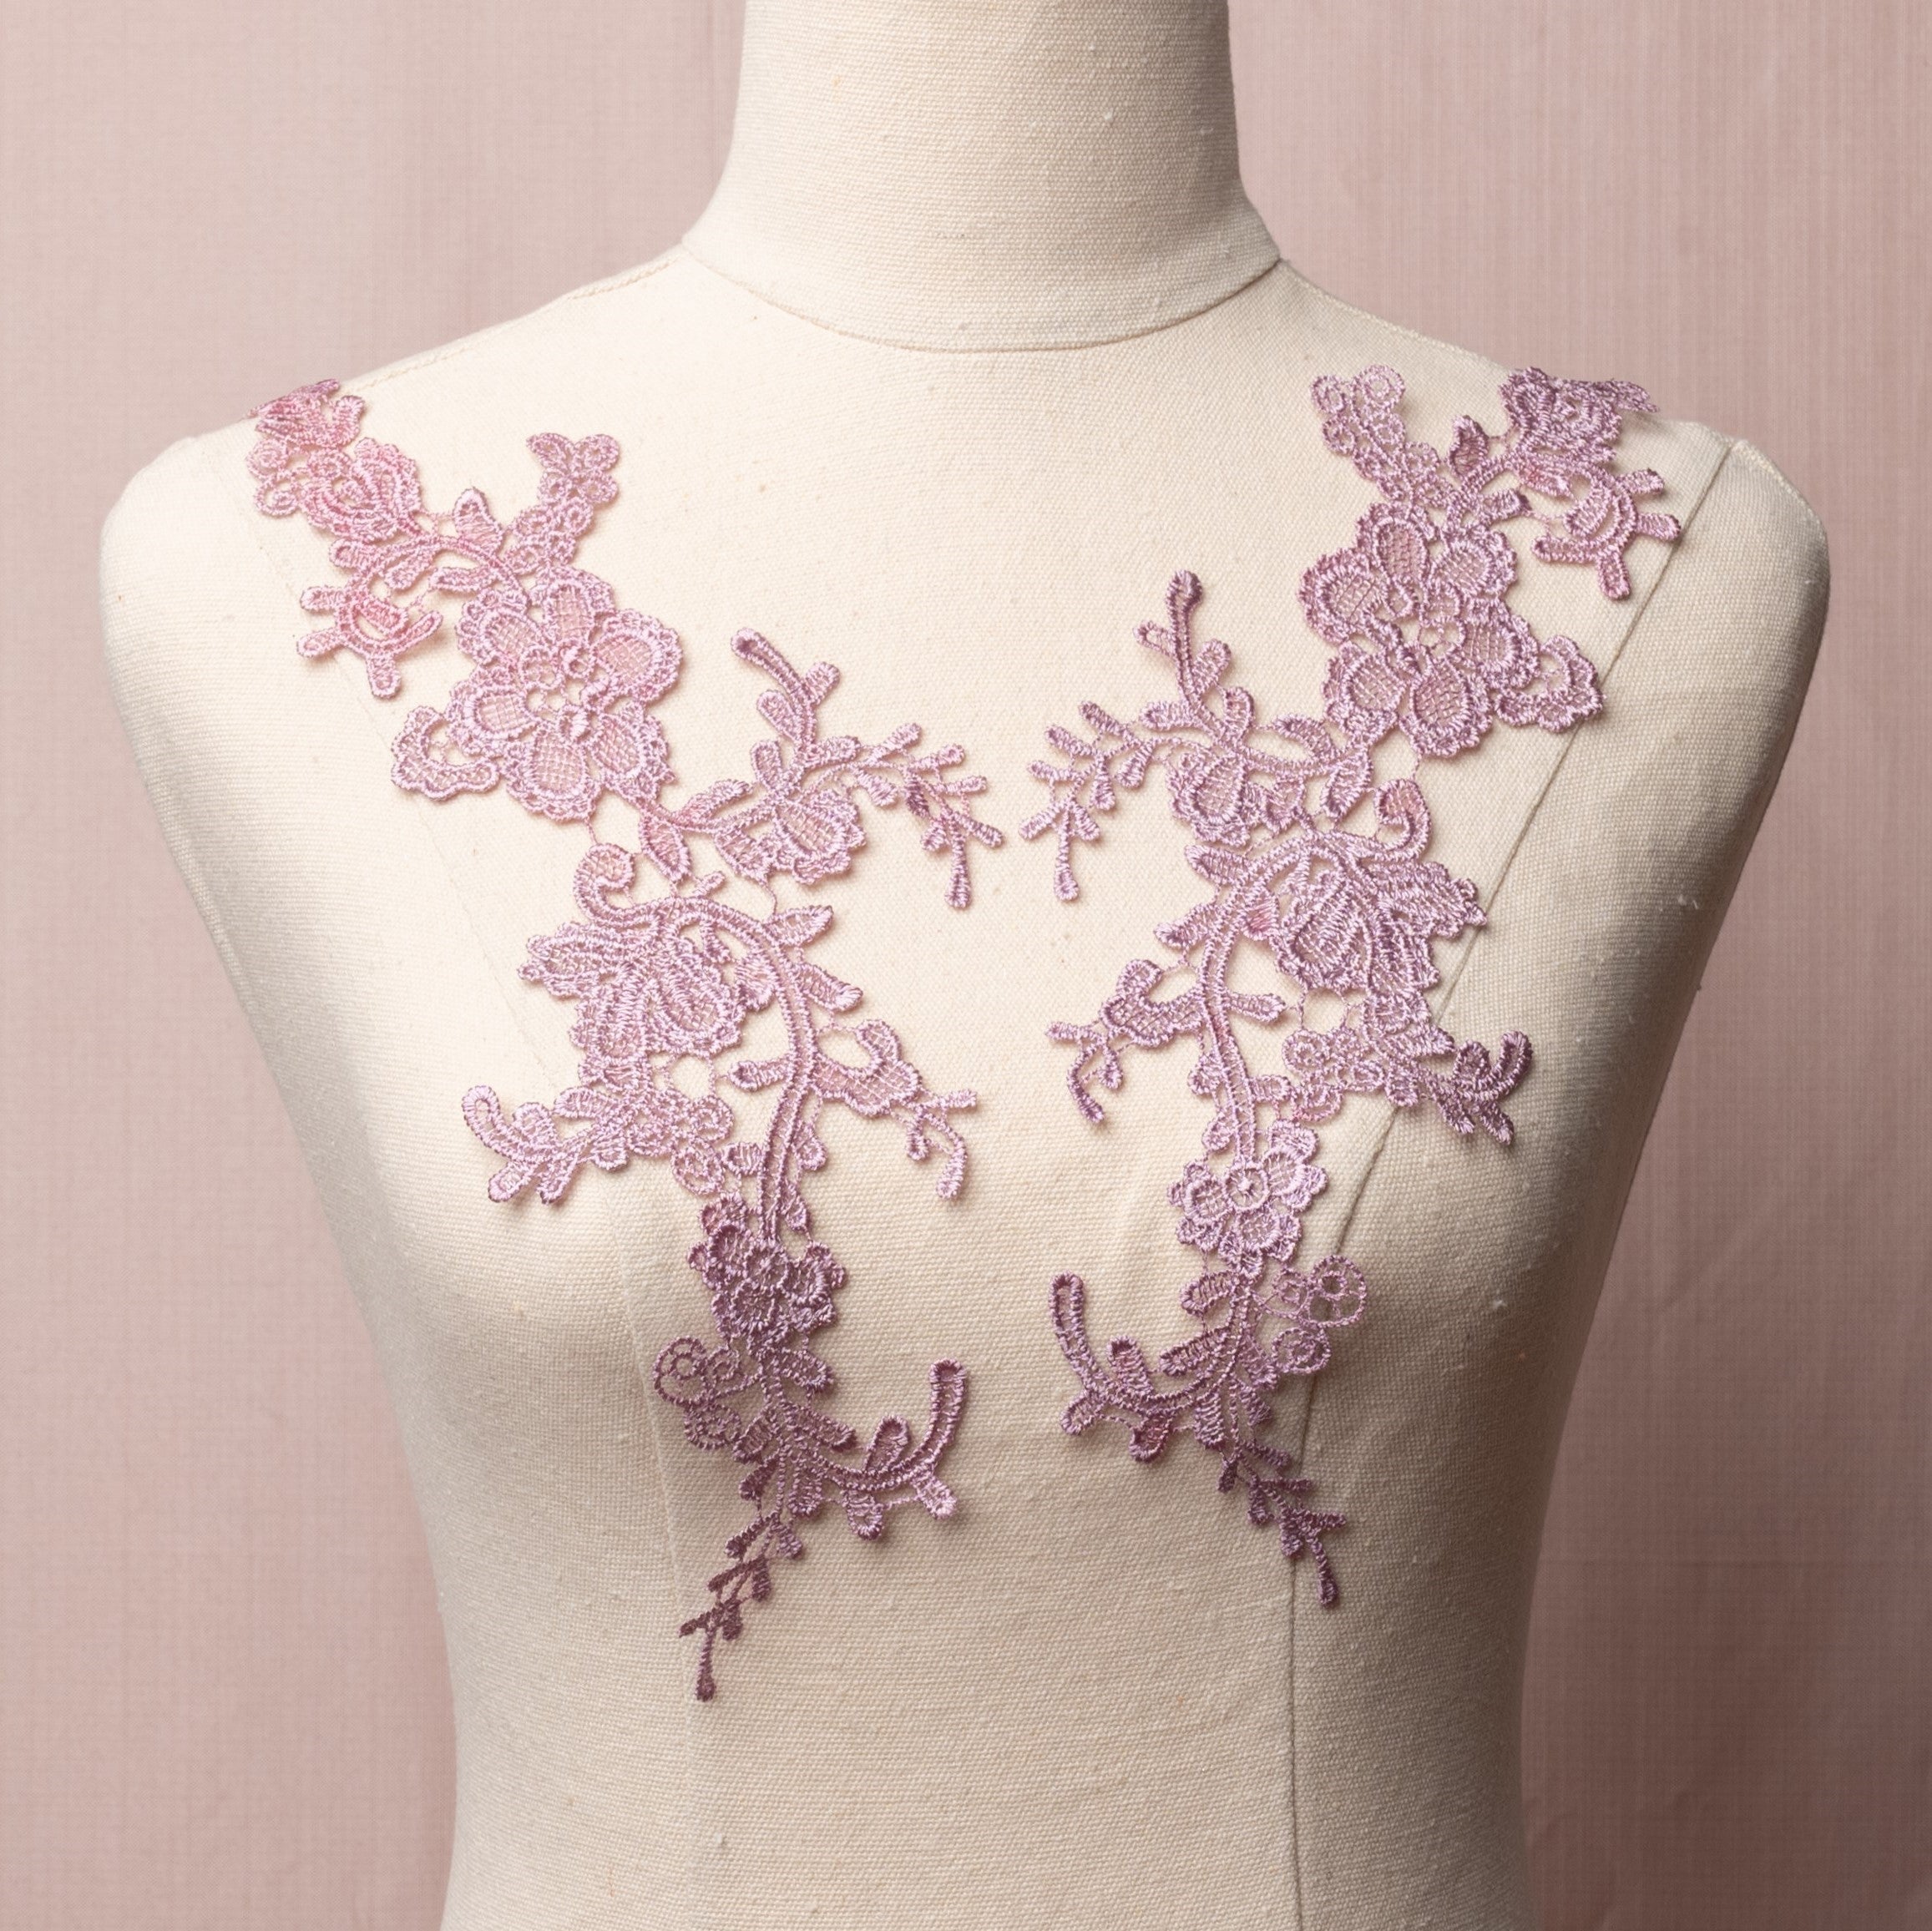 Heavily embroidered mauve floral applique pair displayed on a mannequin.